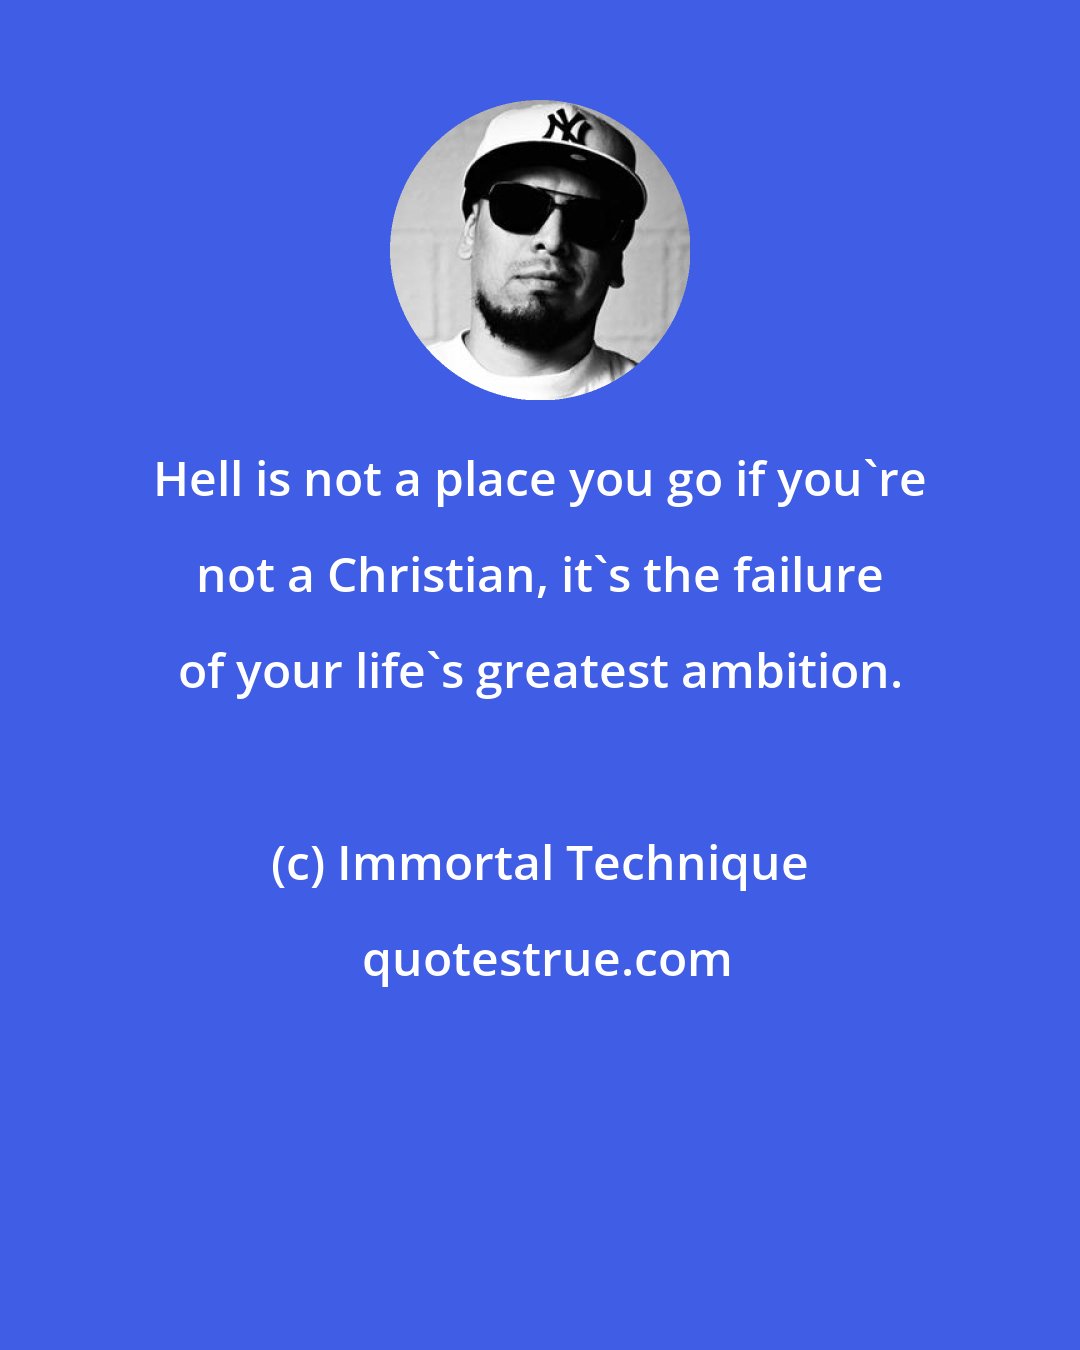 Immortal Technique: Hell is not a place you go if you're not a Christian, it's the failure of your life's greatest ambition.